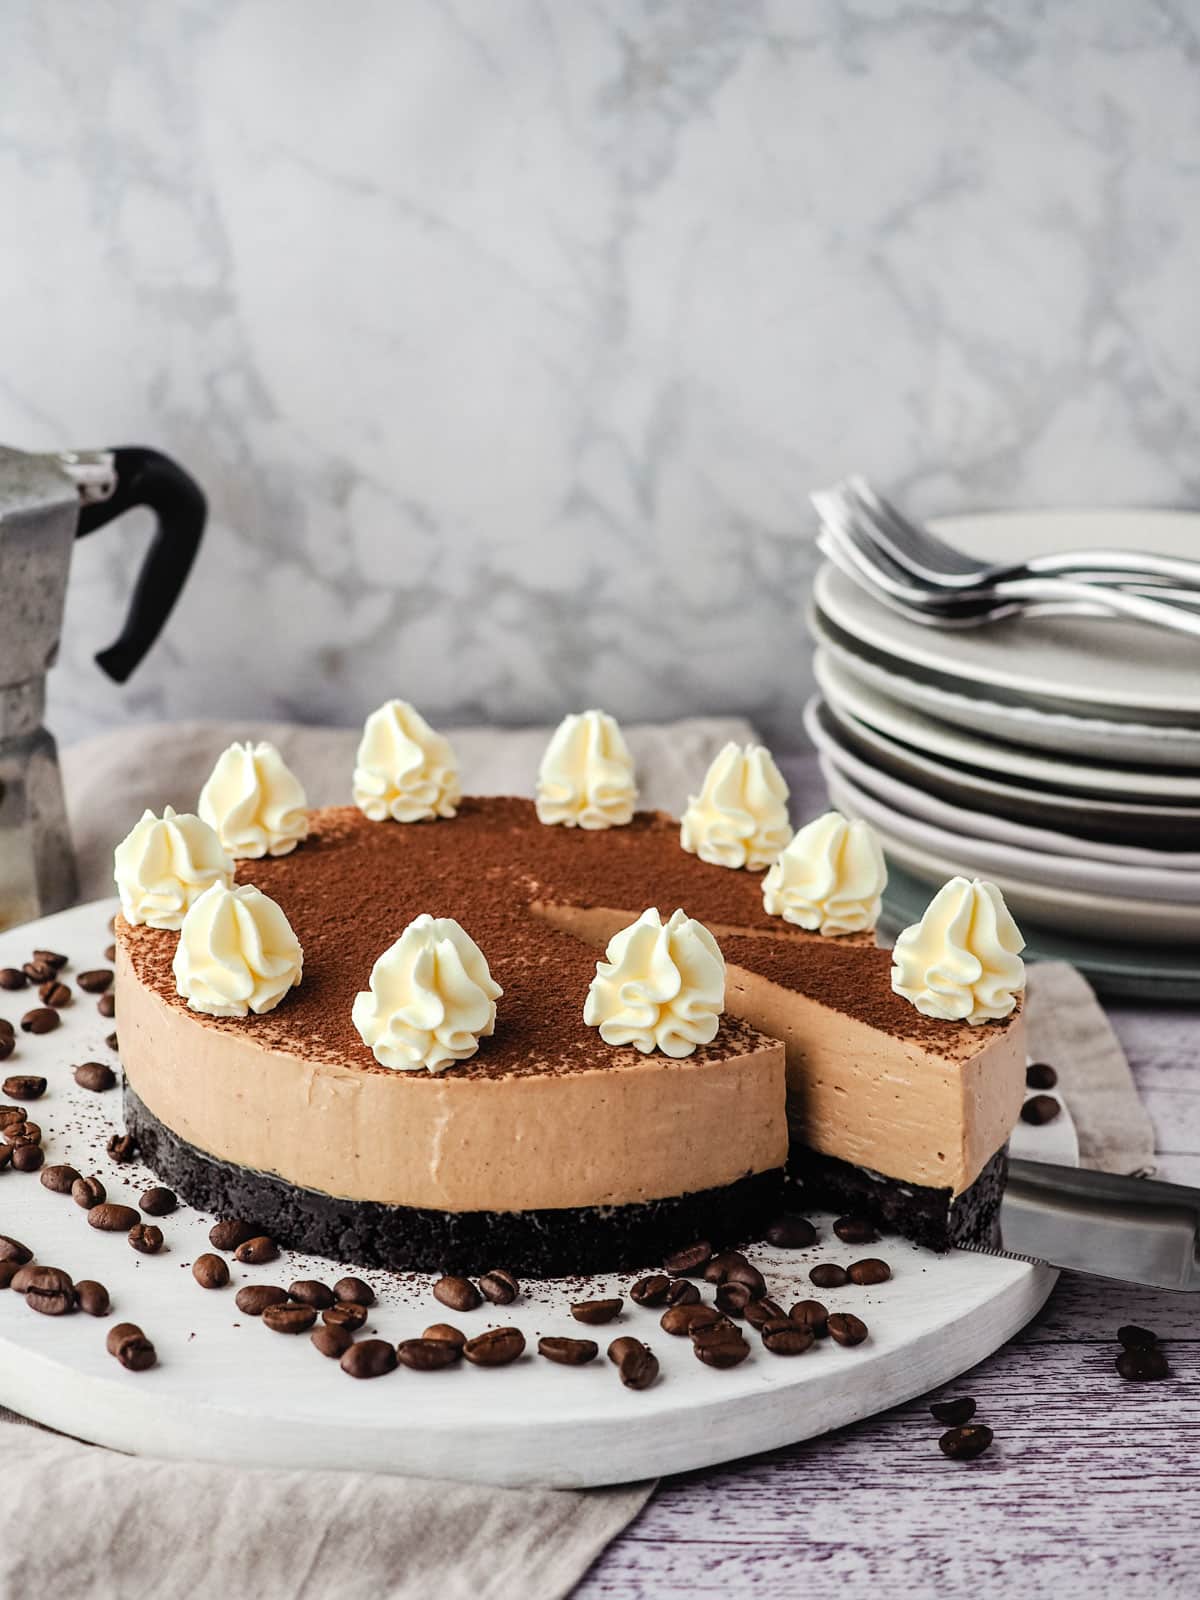 Coffee cheesecake with a slice being taking out of it, with a stack of plates and forks and an espresso maker in the background.